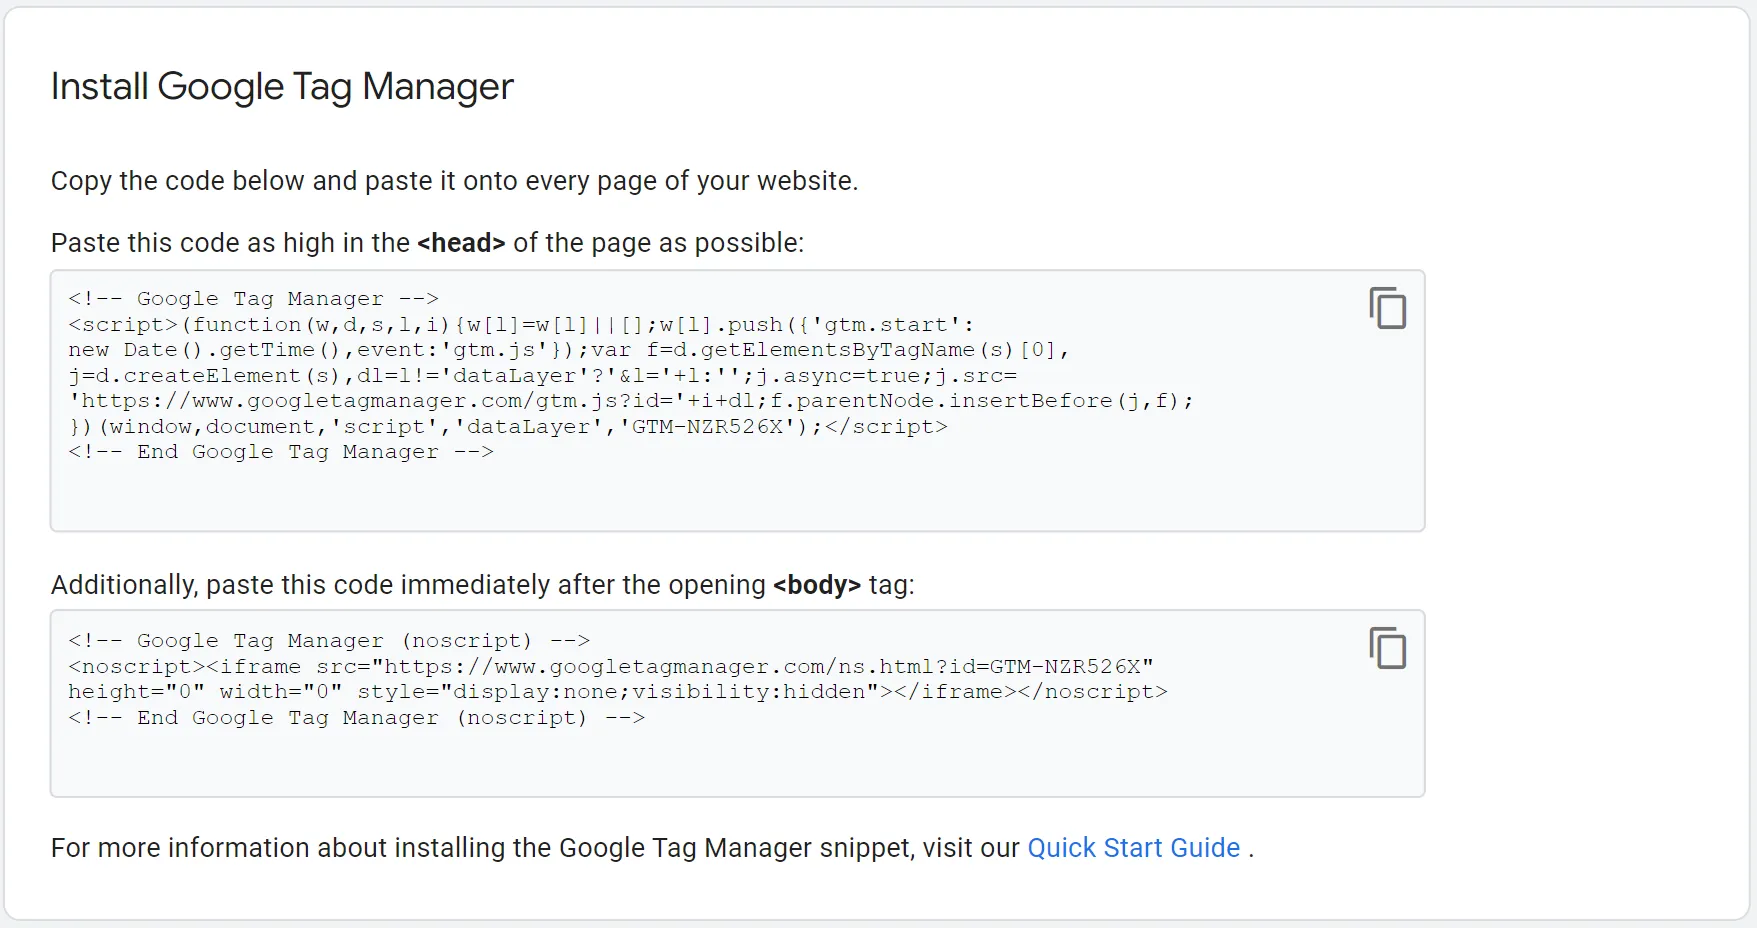 To install Google Tag Manager copy the codes and paste them onto your website in the head and body section.